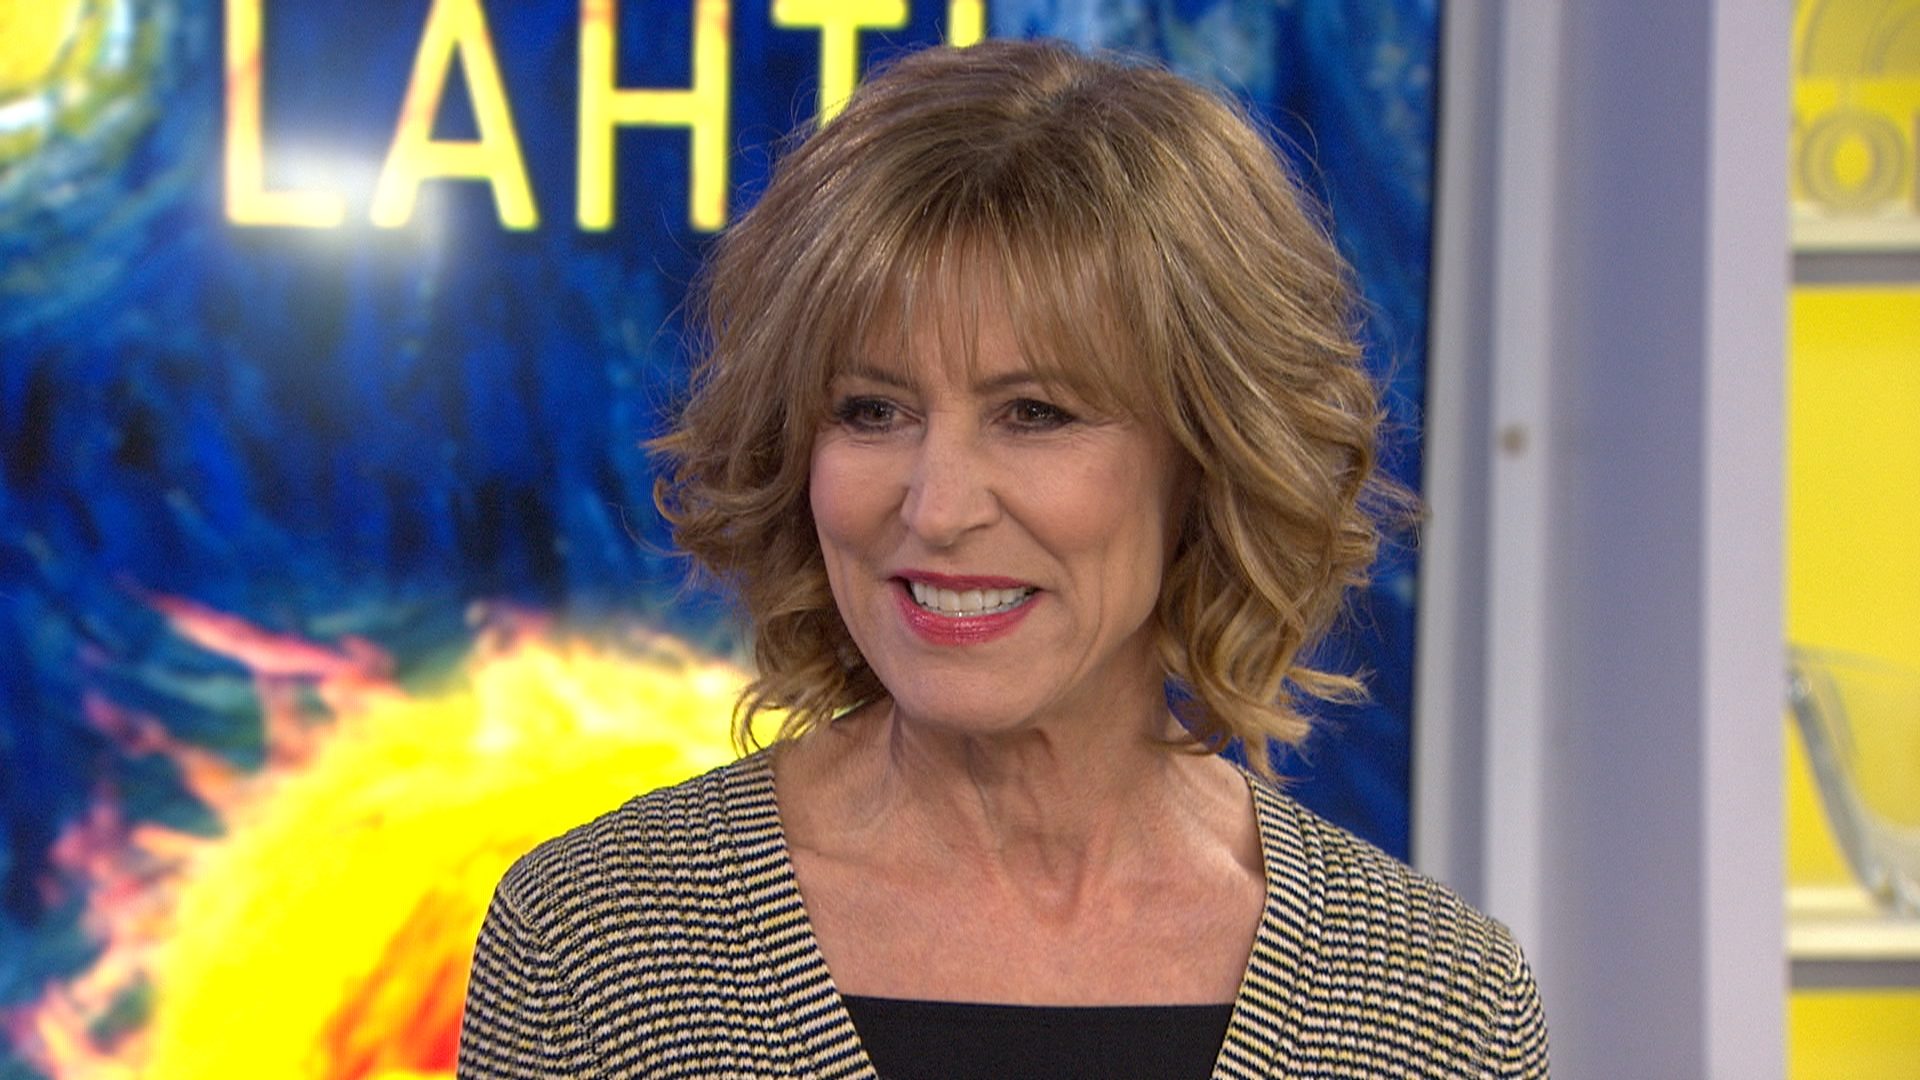 Christine Lahti shares poignant story of her late sister.